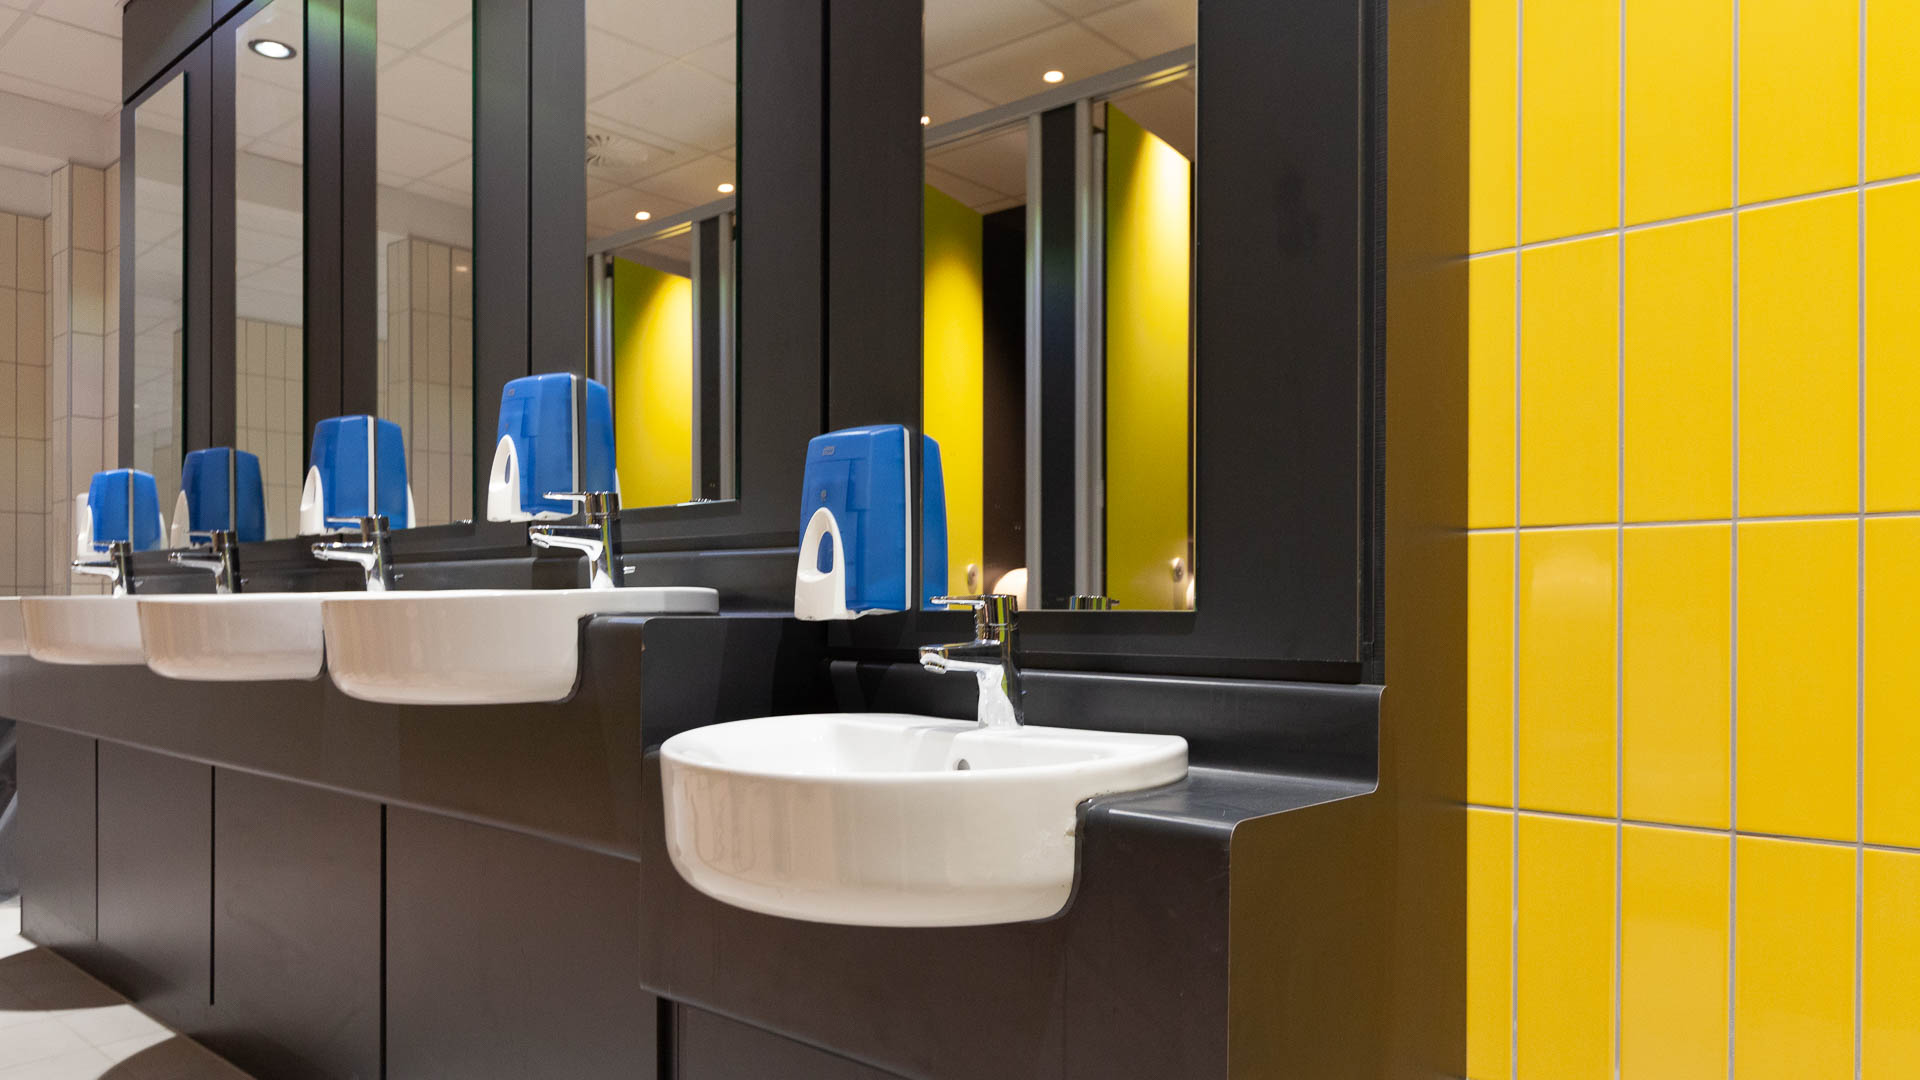 Vanity Units in a Leisure Centre